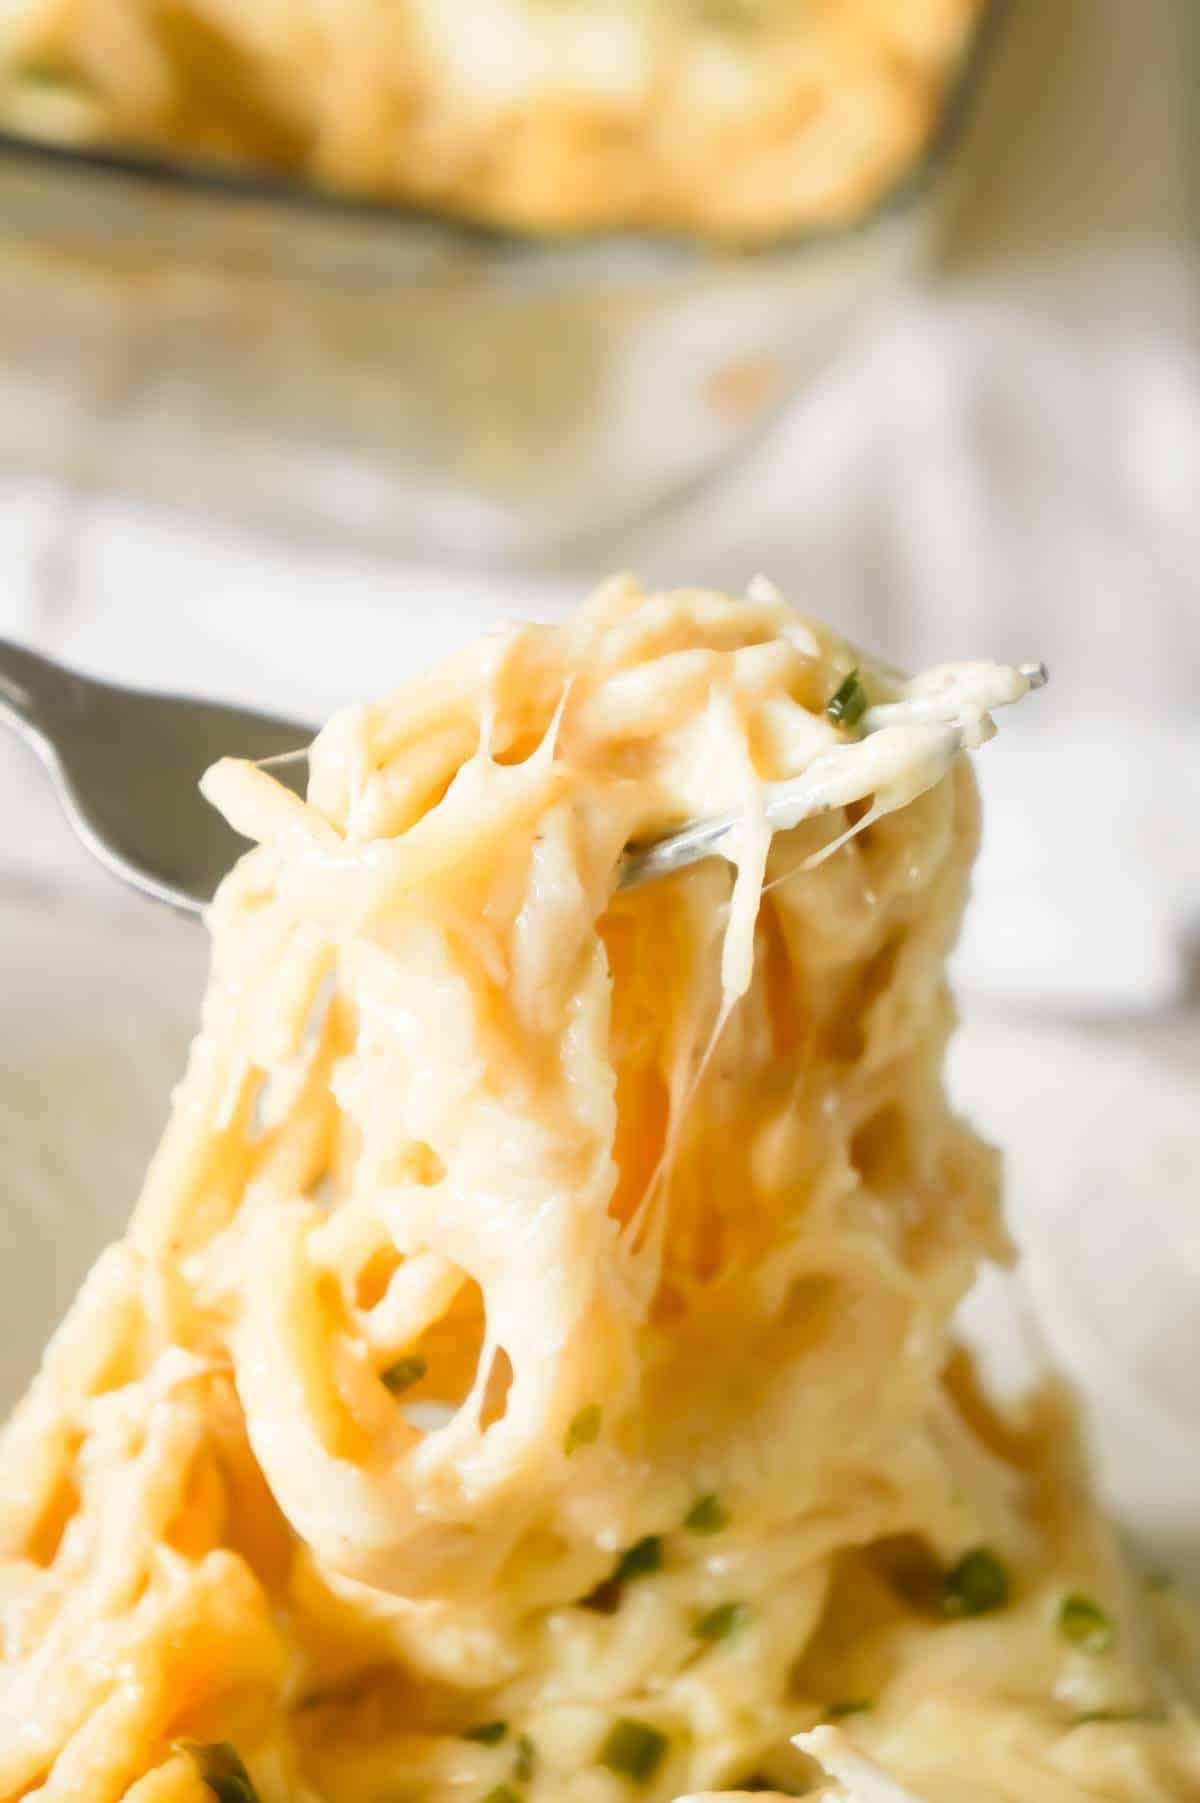 Turkey Tetrazzini is a creamy and cheesy baked pasta recipe perfect for using up leftover Thanksgiving turkey. This creamy spaghetti is loaded with shredded turkey, cream cheese, Parmesan and mozzarella.